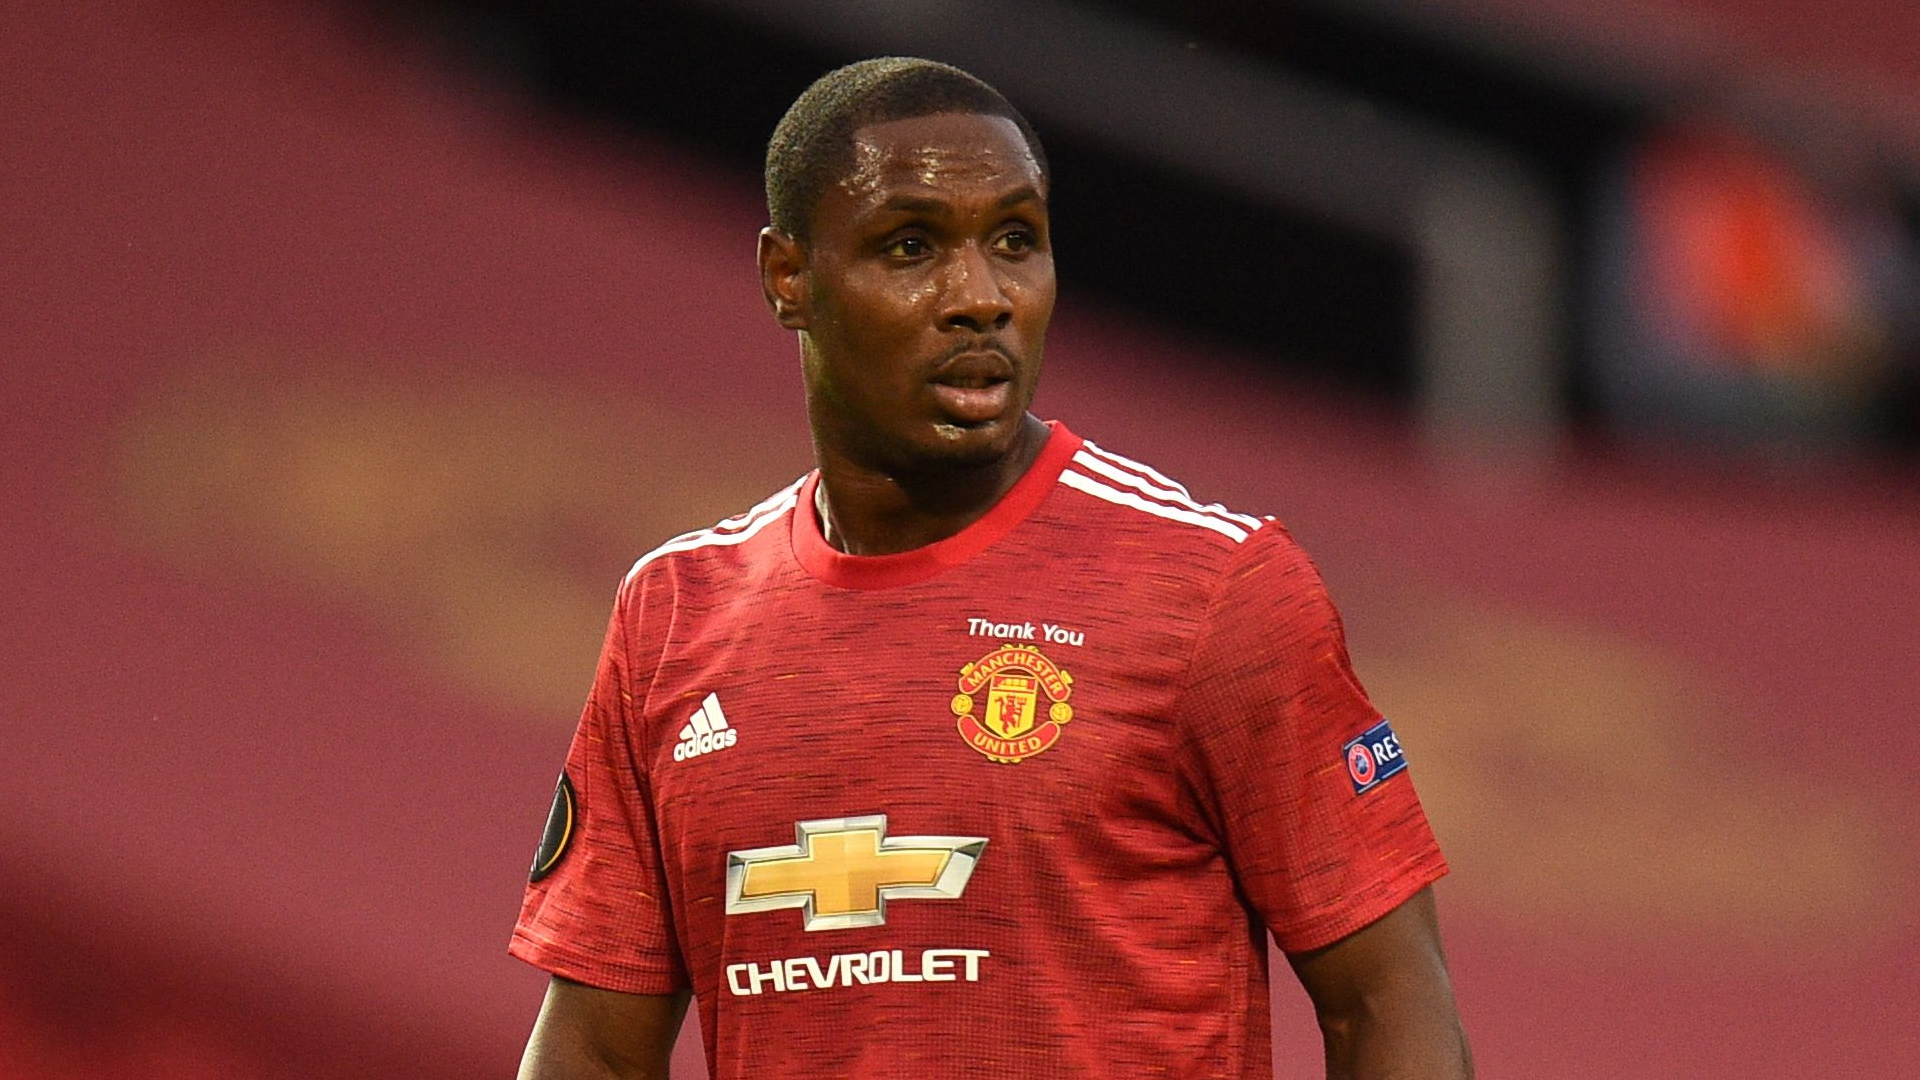 Ighalo out, Bailly on bench as Manchester United clash against Brighton and Hove Albion